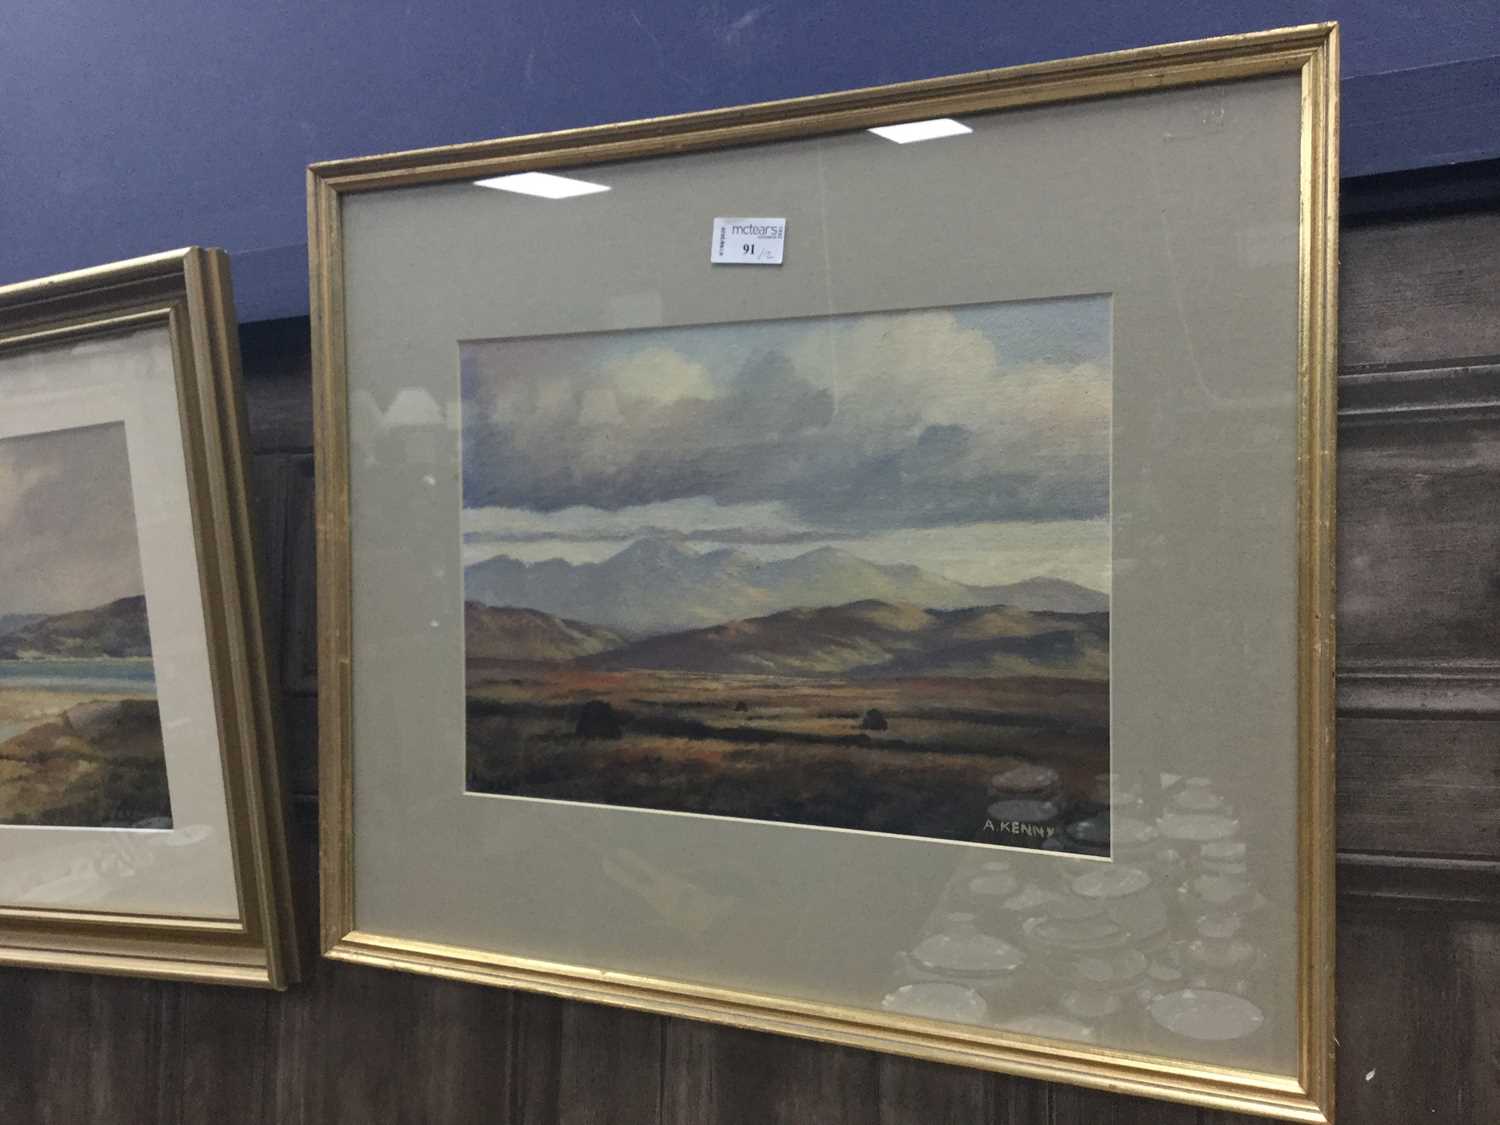 Lot 91 - A PAIR OF SCOTTISH LANDSCAPES BY A KENNY